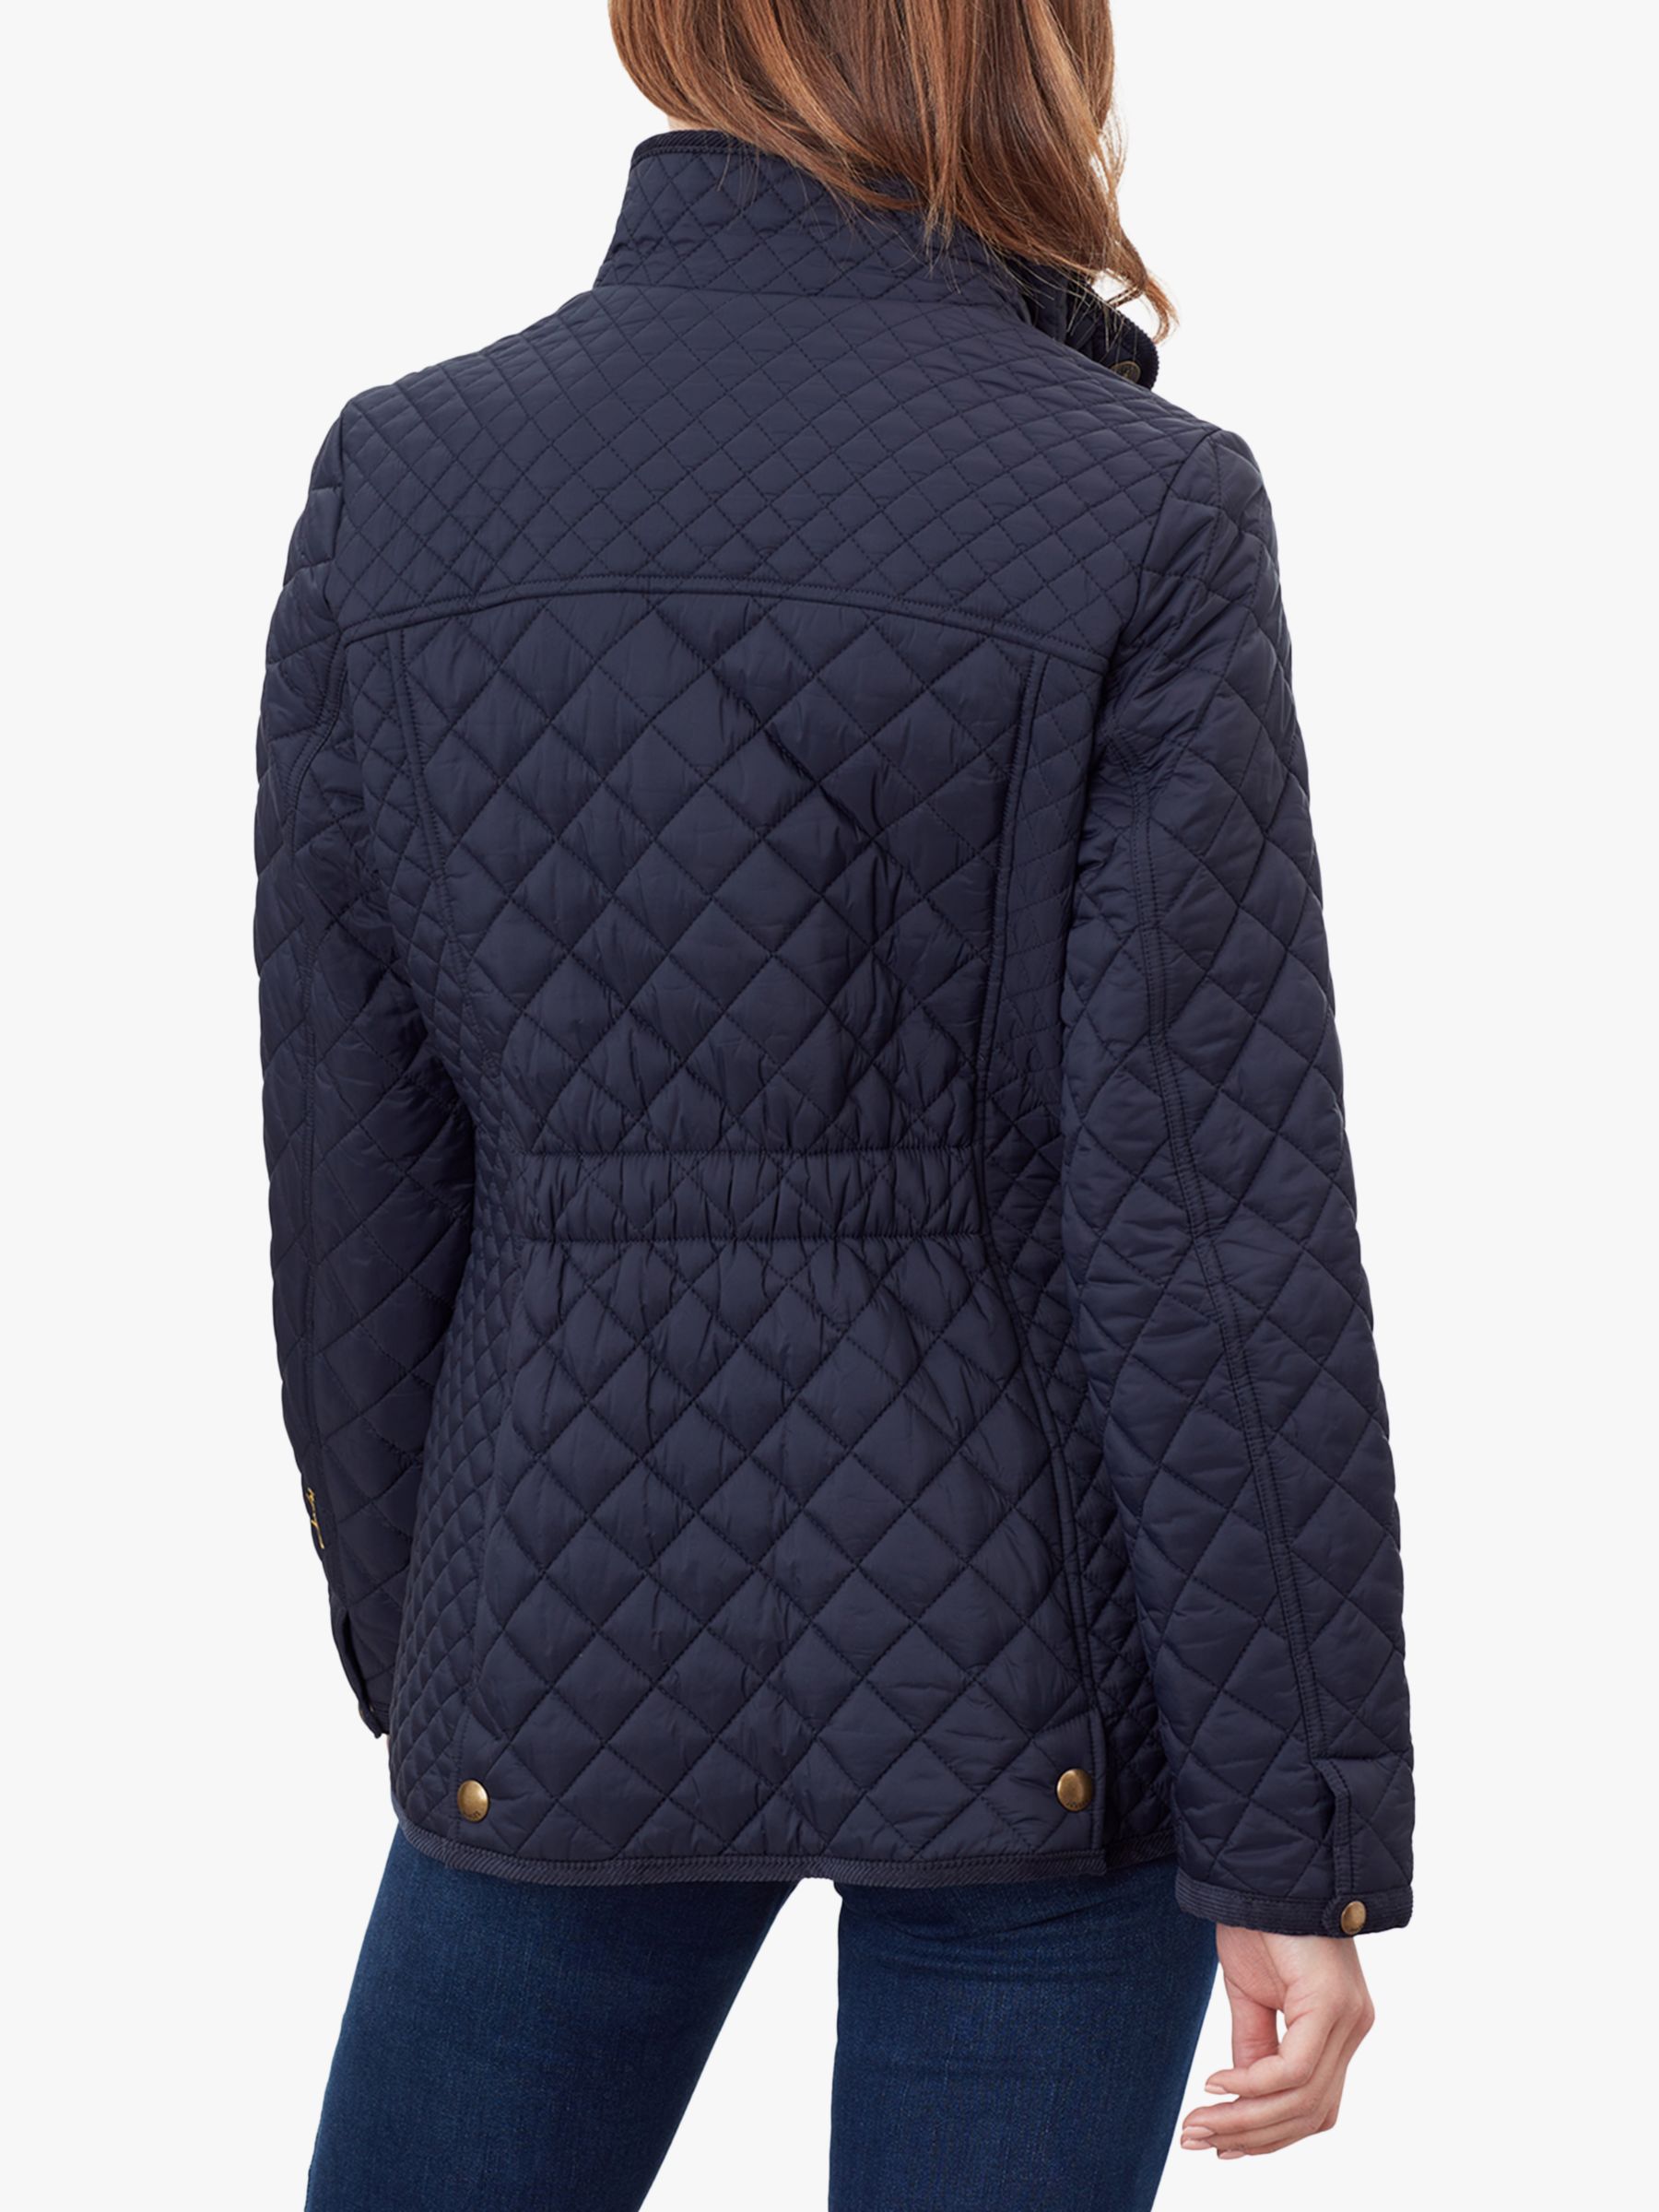 Joules Newdale Quilted Jacket, Marine Navy at John Lewis & Partners